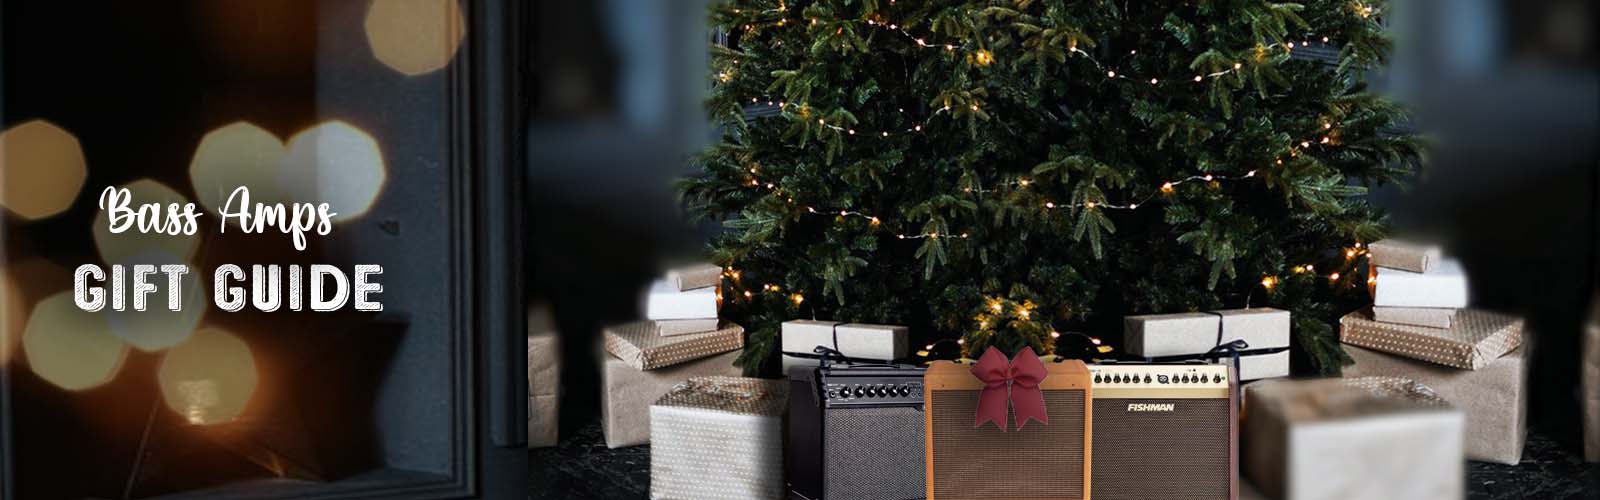 Bass Amps Gift Guide